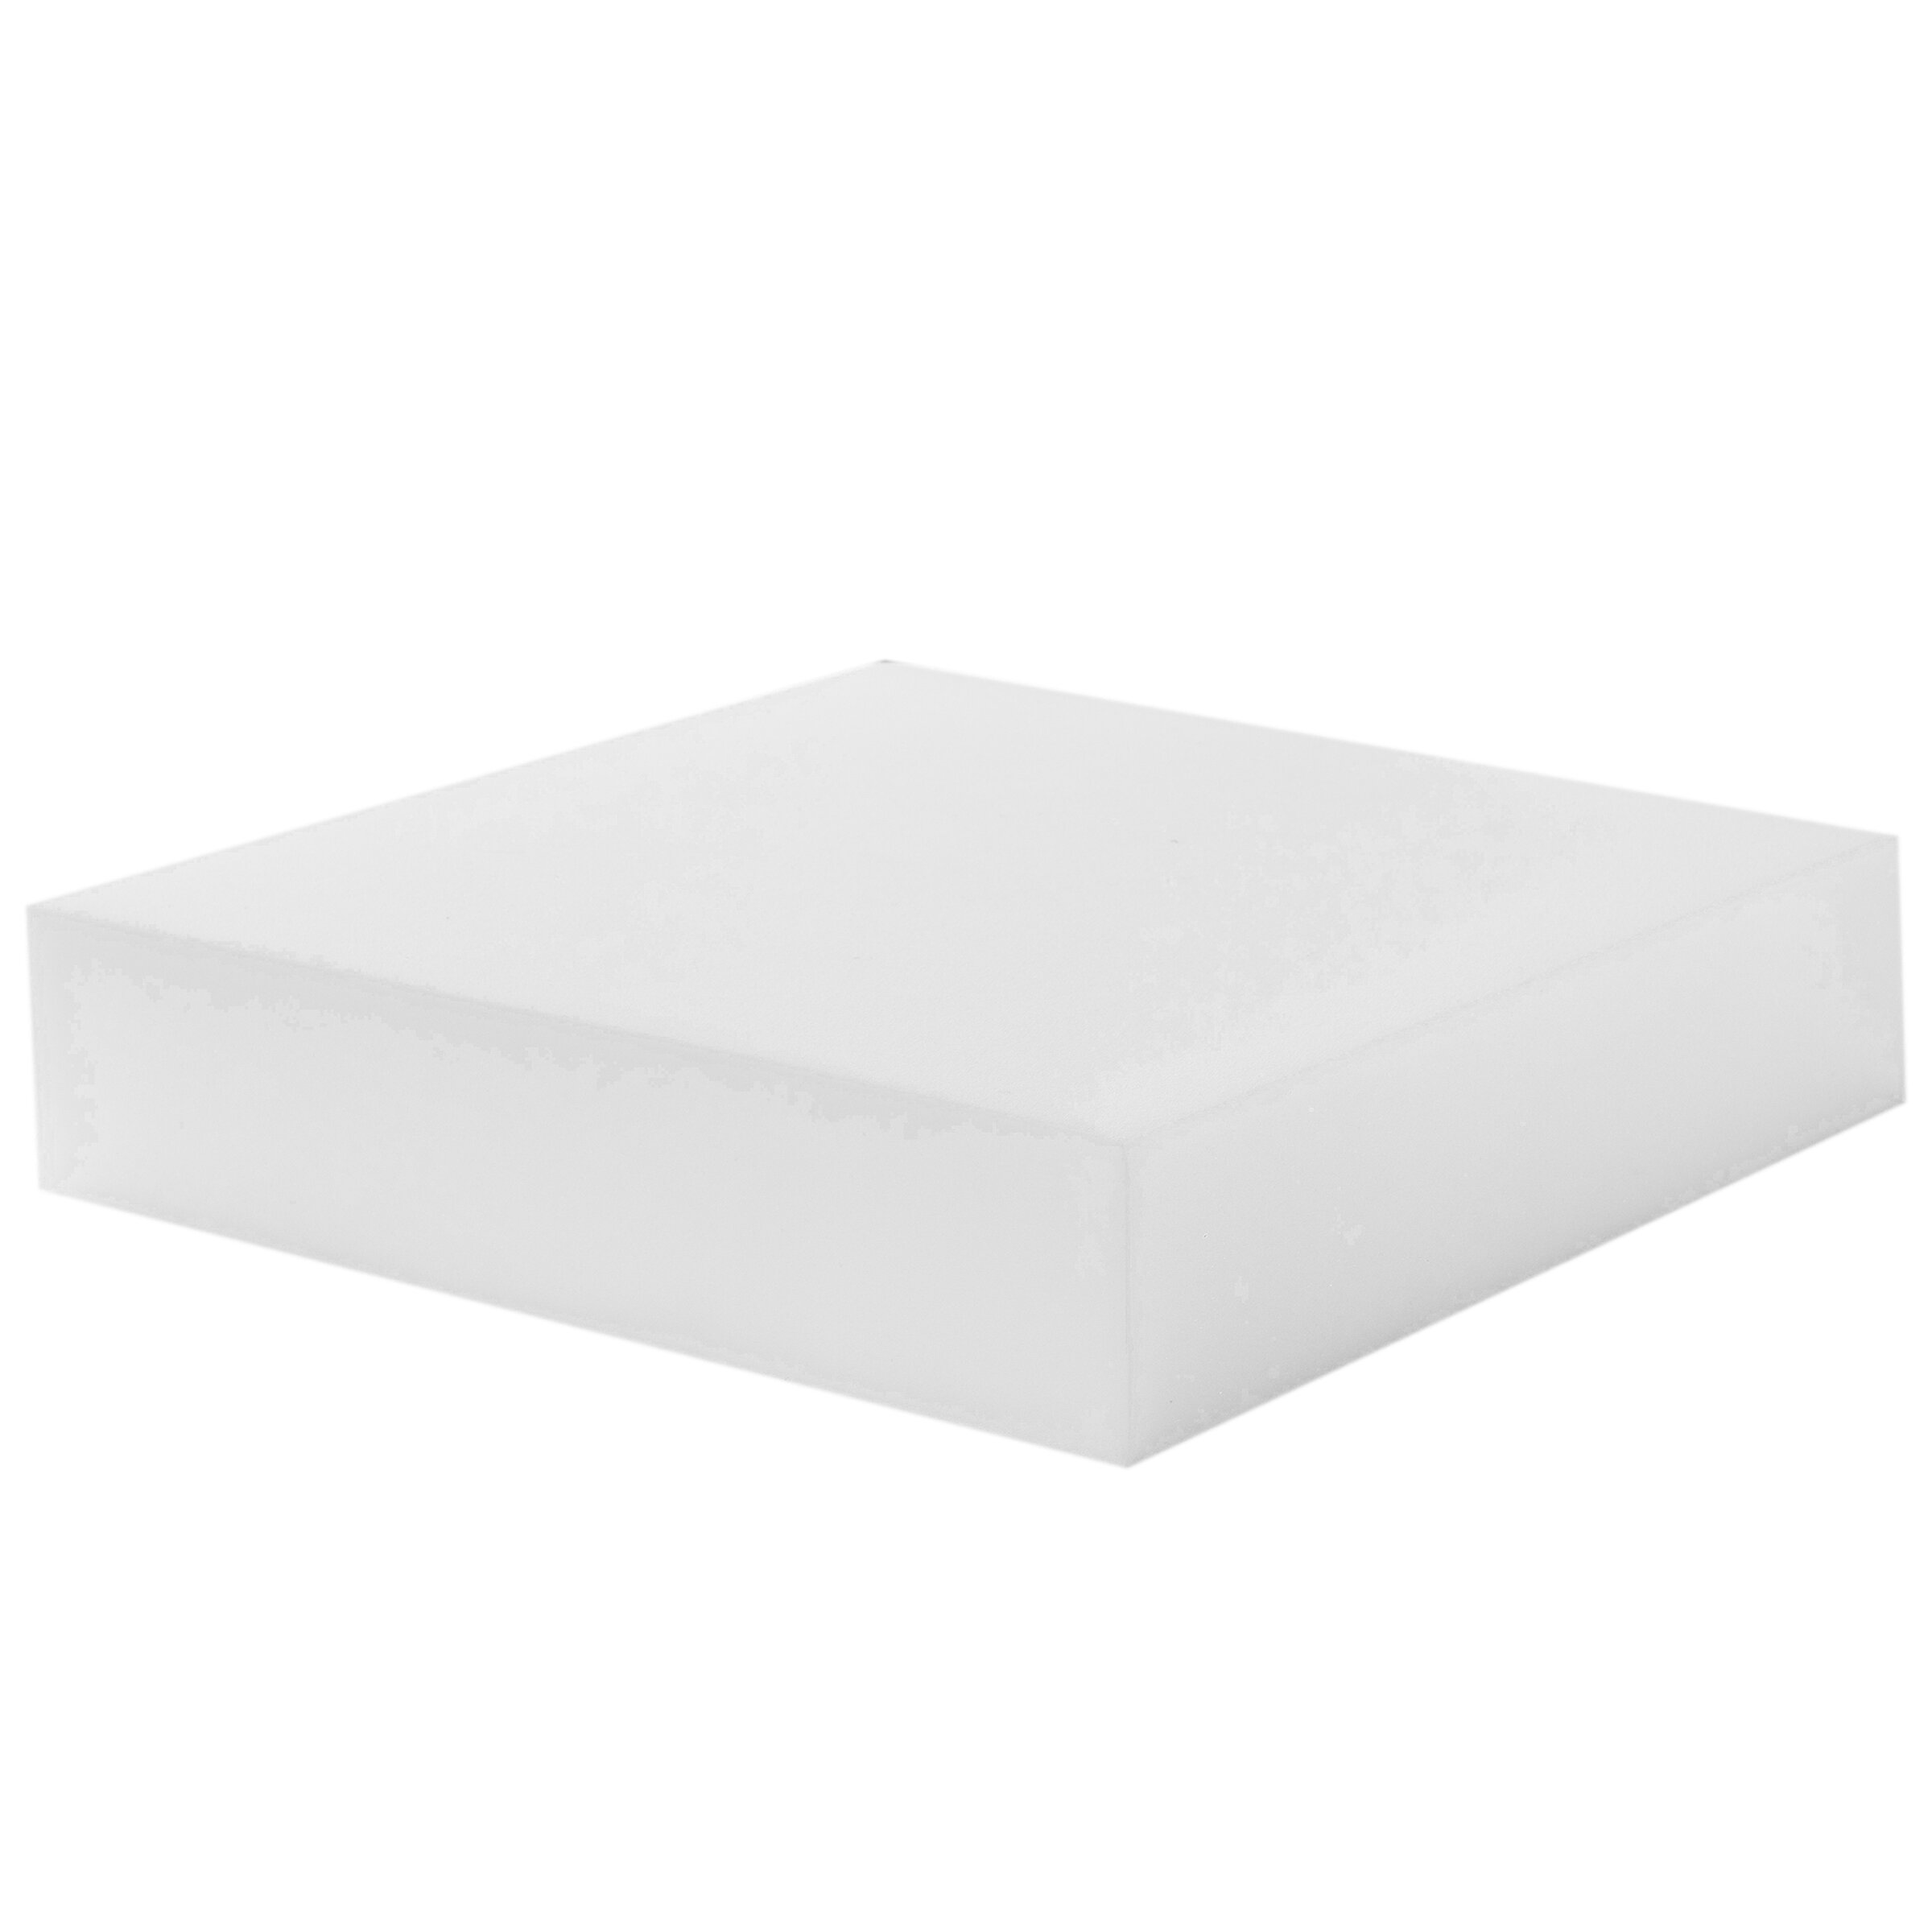 Rectangle Upholstery Foam Cushion,1/2/3/4 Inch Thick,Firm Foam Replacement  Foam Padding,Perfect for Chairs,Sofas,Bench,Headboards and DIY,Custom Sizes